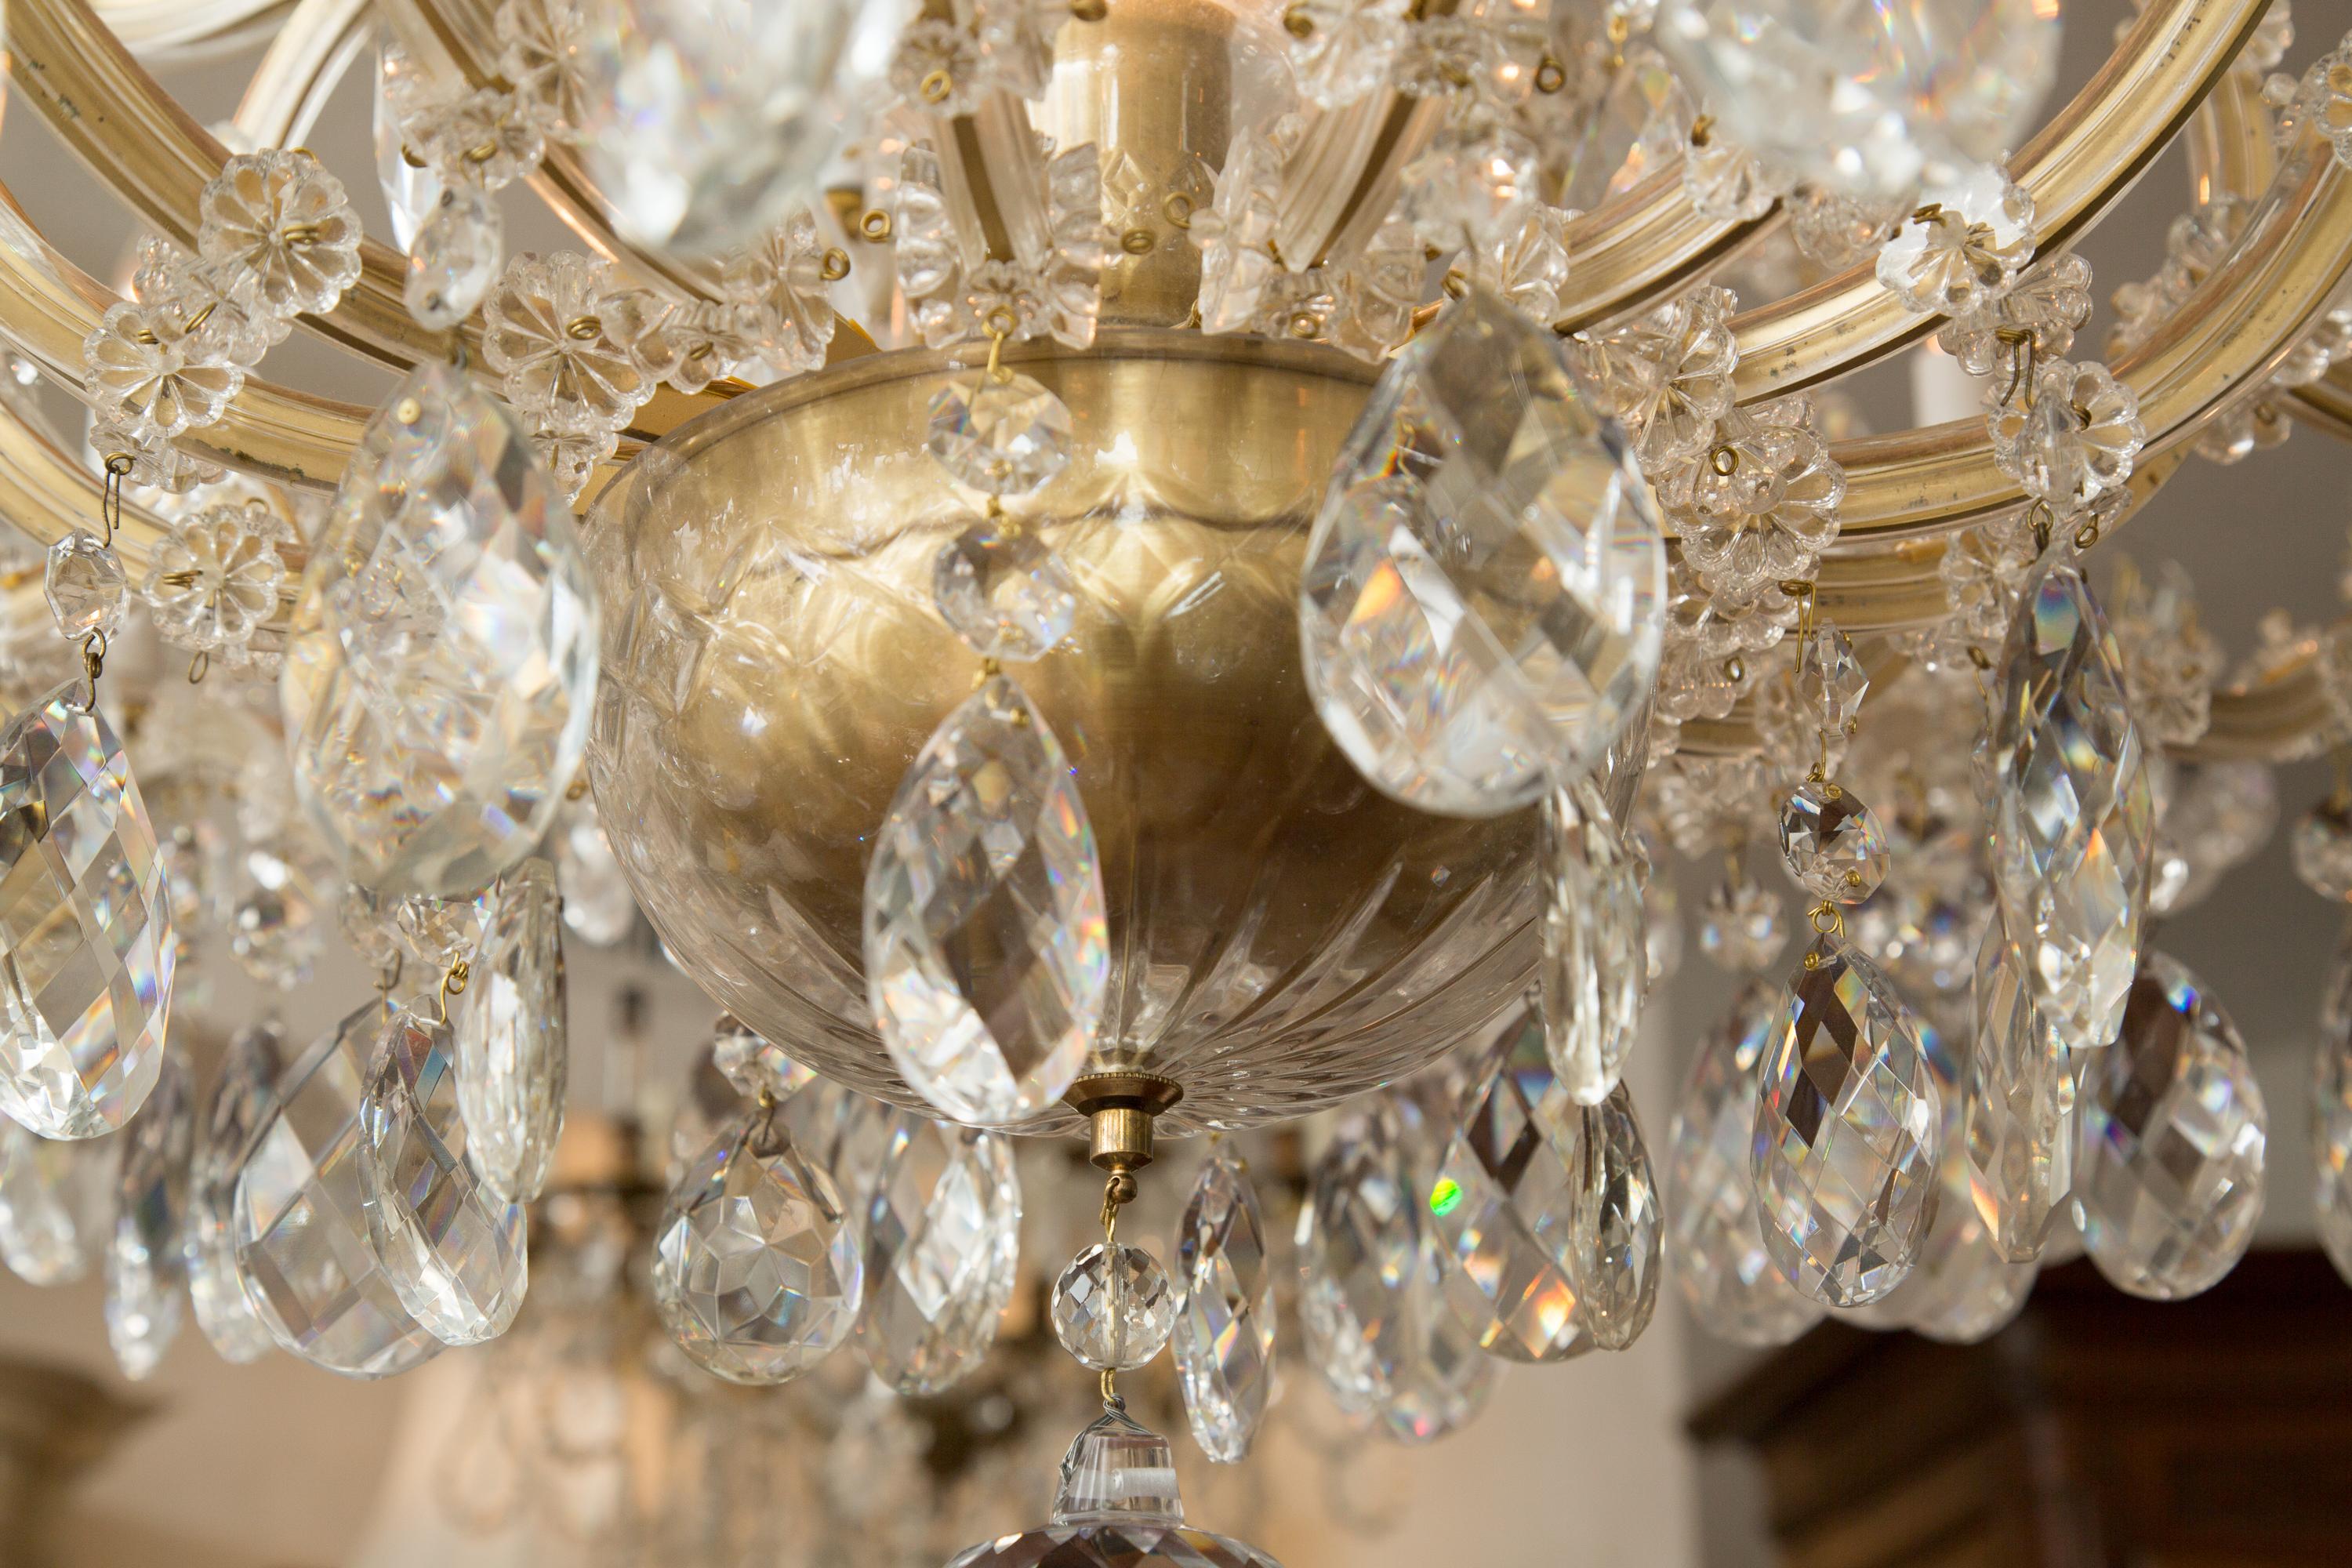 This is a sumptuous hanging chandelier with many curves and shimmering crystal pendalogues. When lighted the chandelier is illuminated the aura is majestic and regal. This is a fine and sophisticated light piece that provides radiance and atmosphere